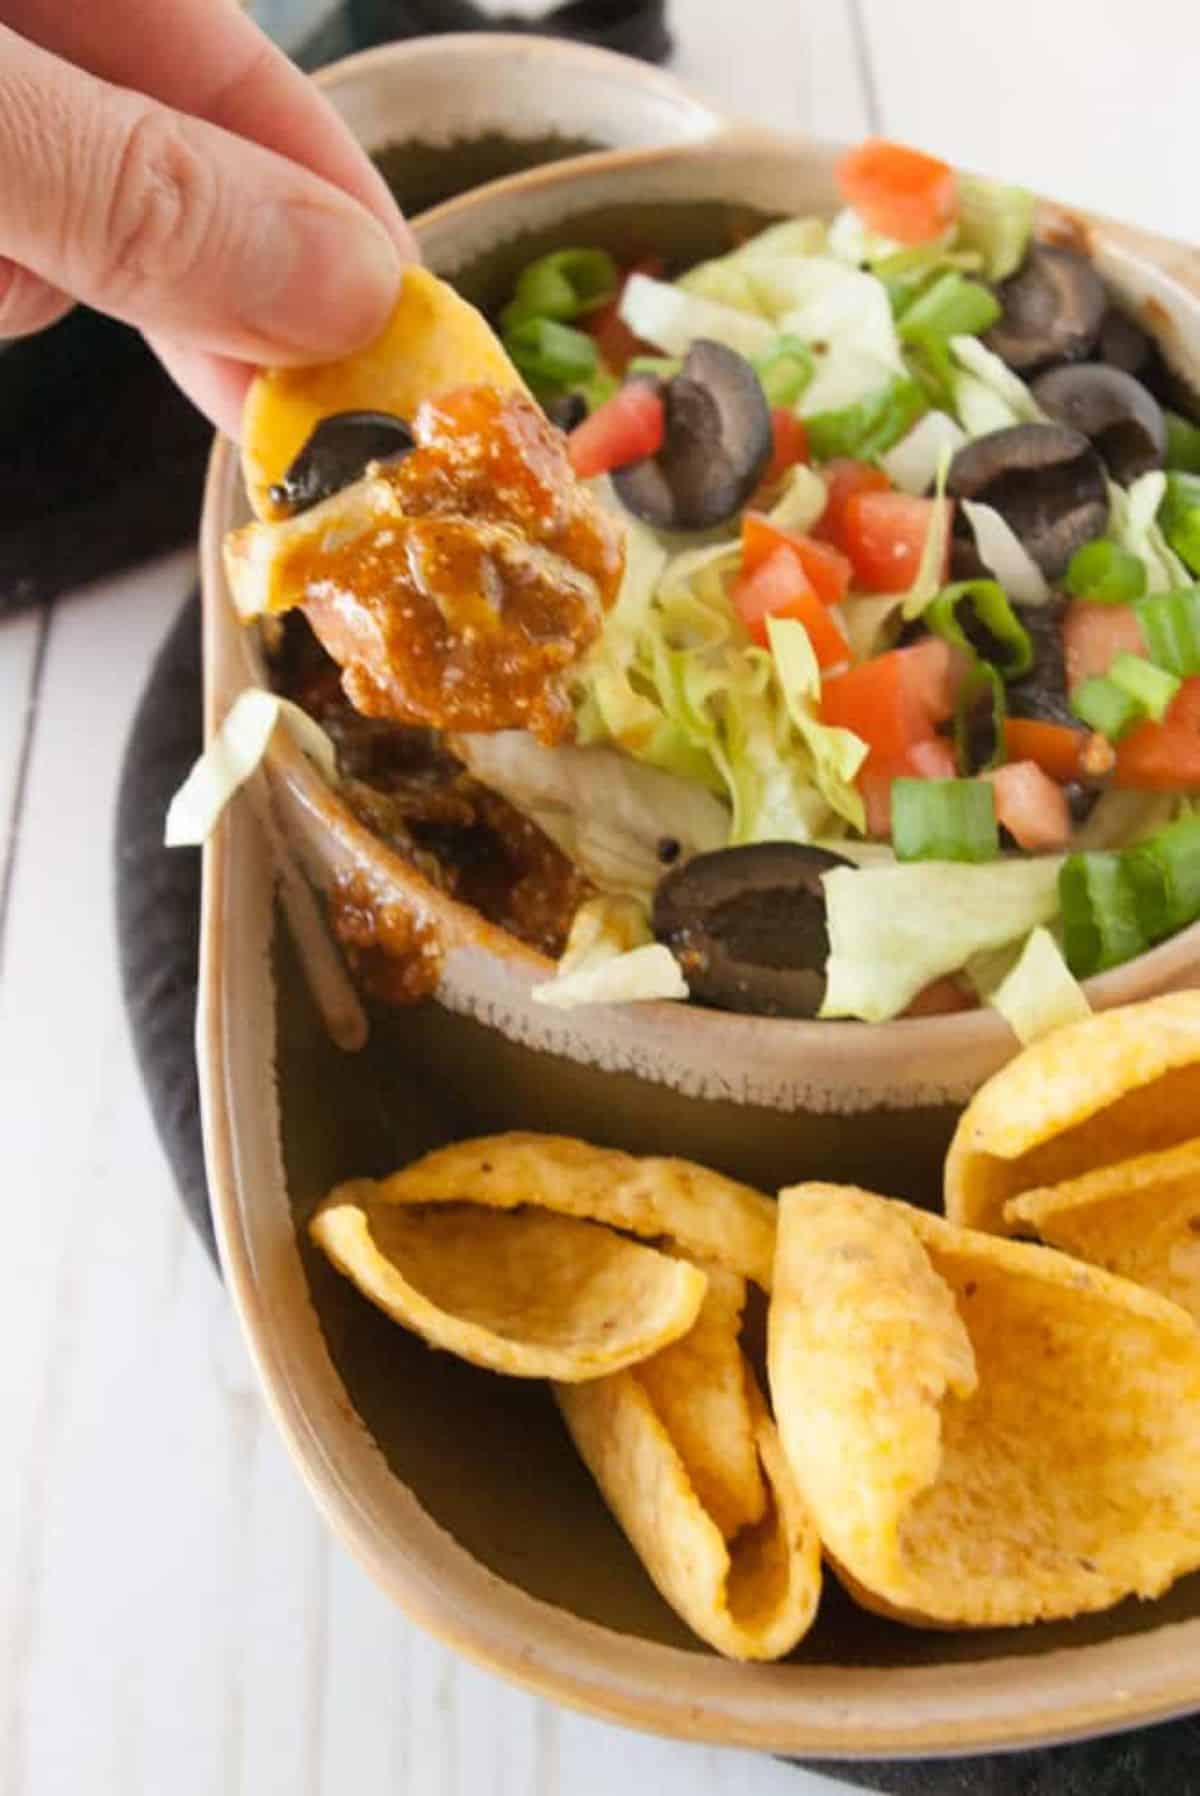 Hot Taco Chili Dip on a cracker held by hand.